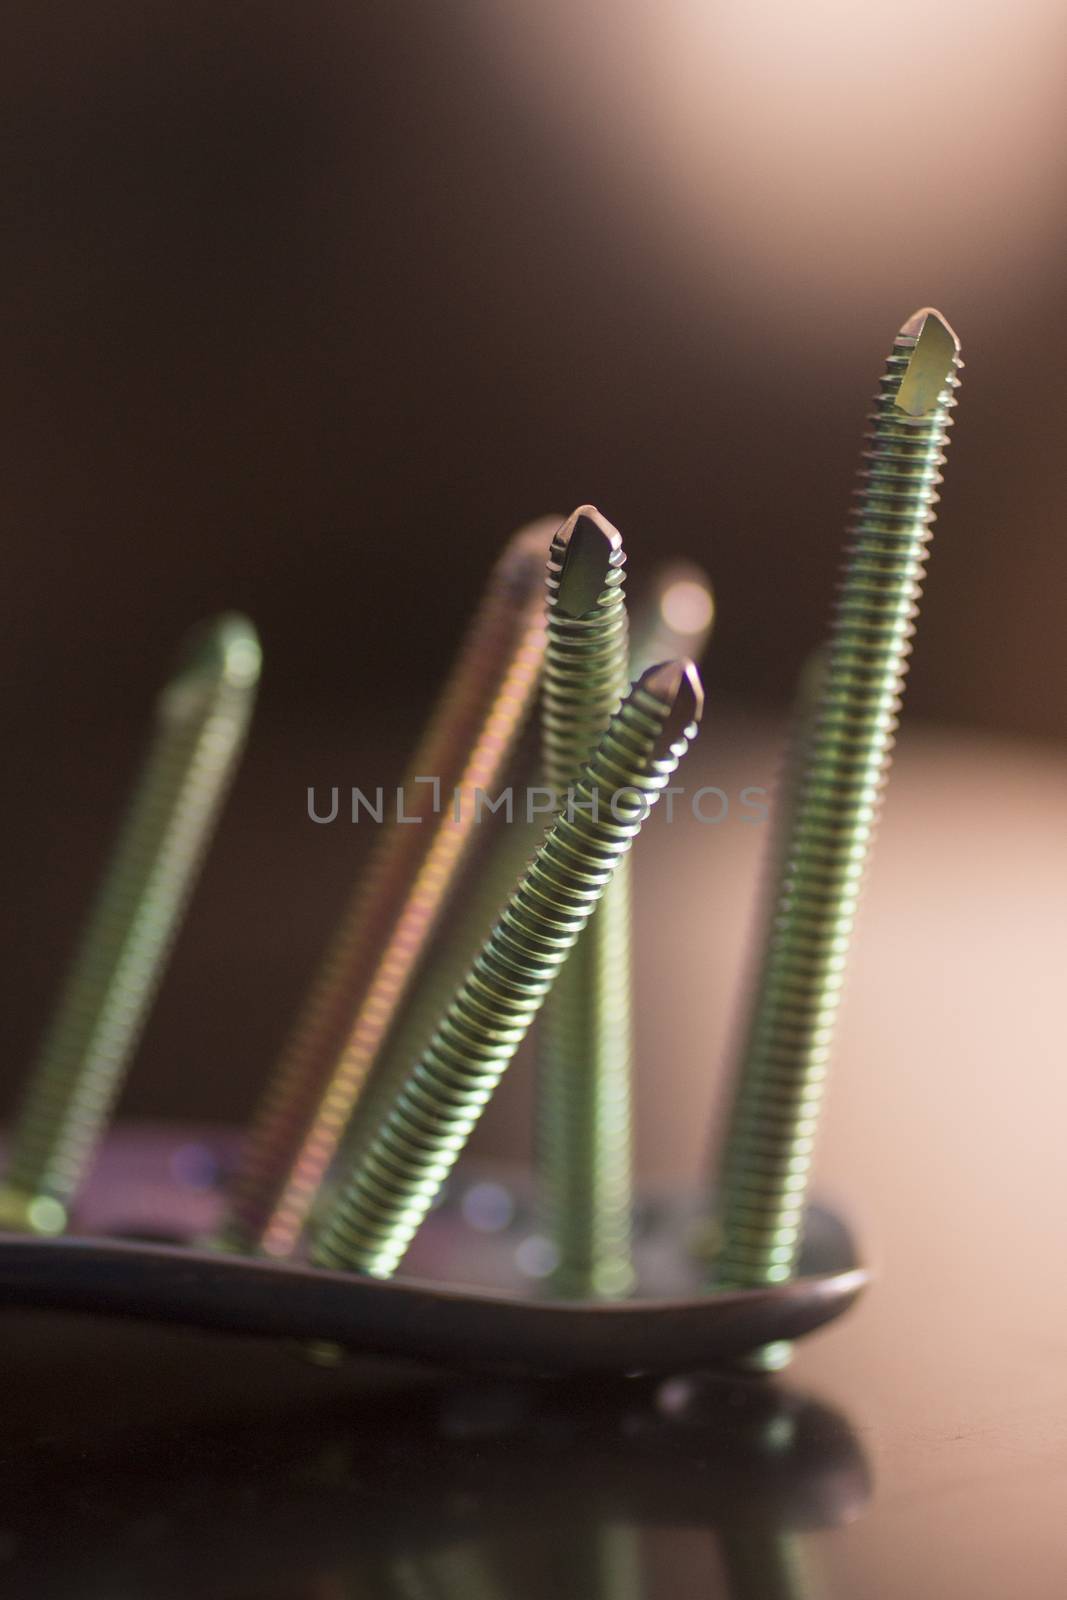 Traumatology orthopedic surgery implant titanium plate and green screws in semi silhouette against plain studio background. Close-up macro photograph in grey tones. 